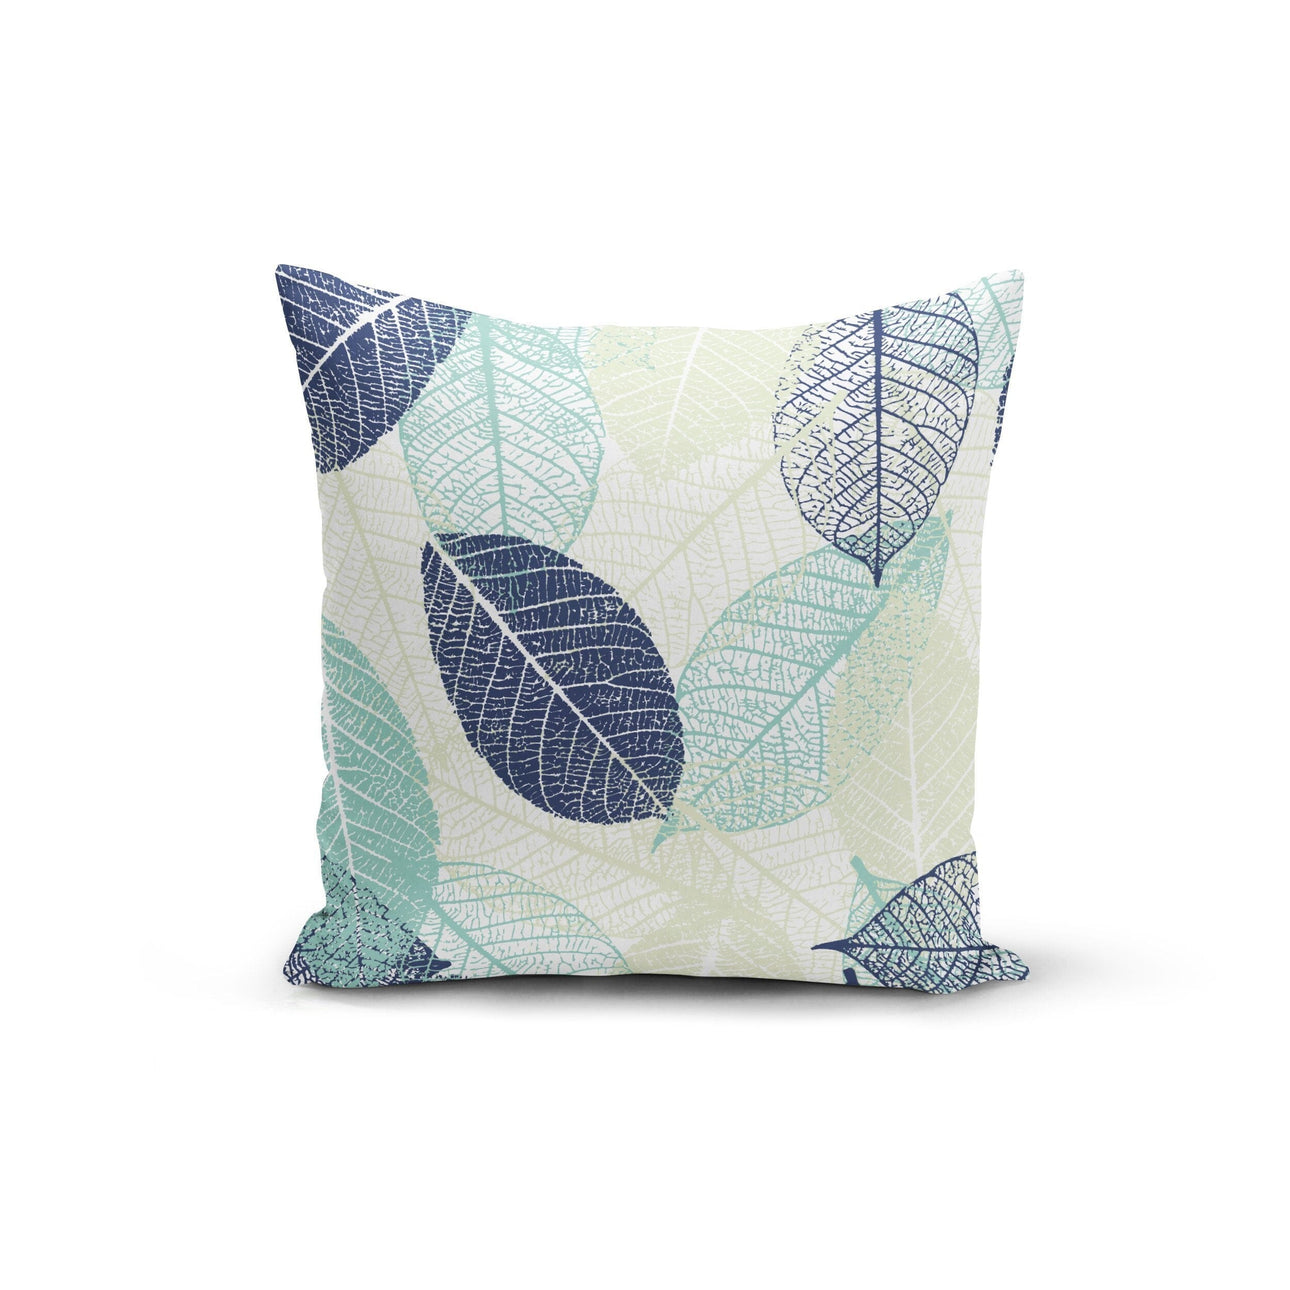 Blue & Teal Leaves Pillow Cover